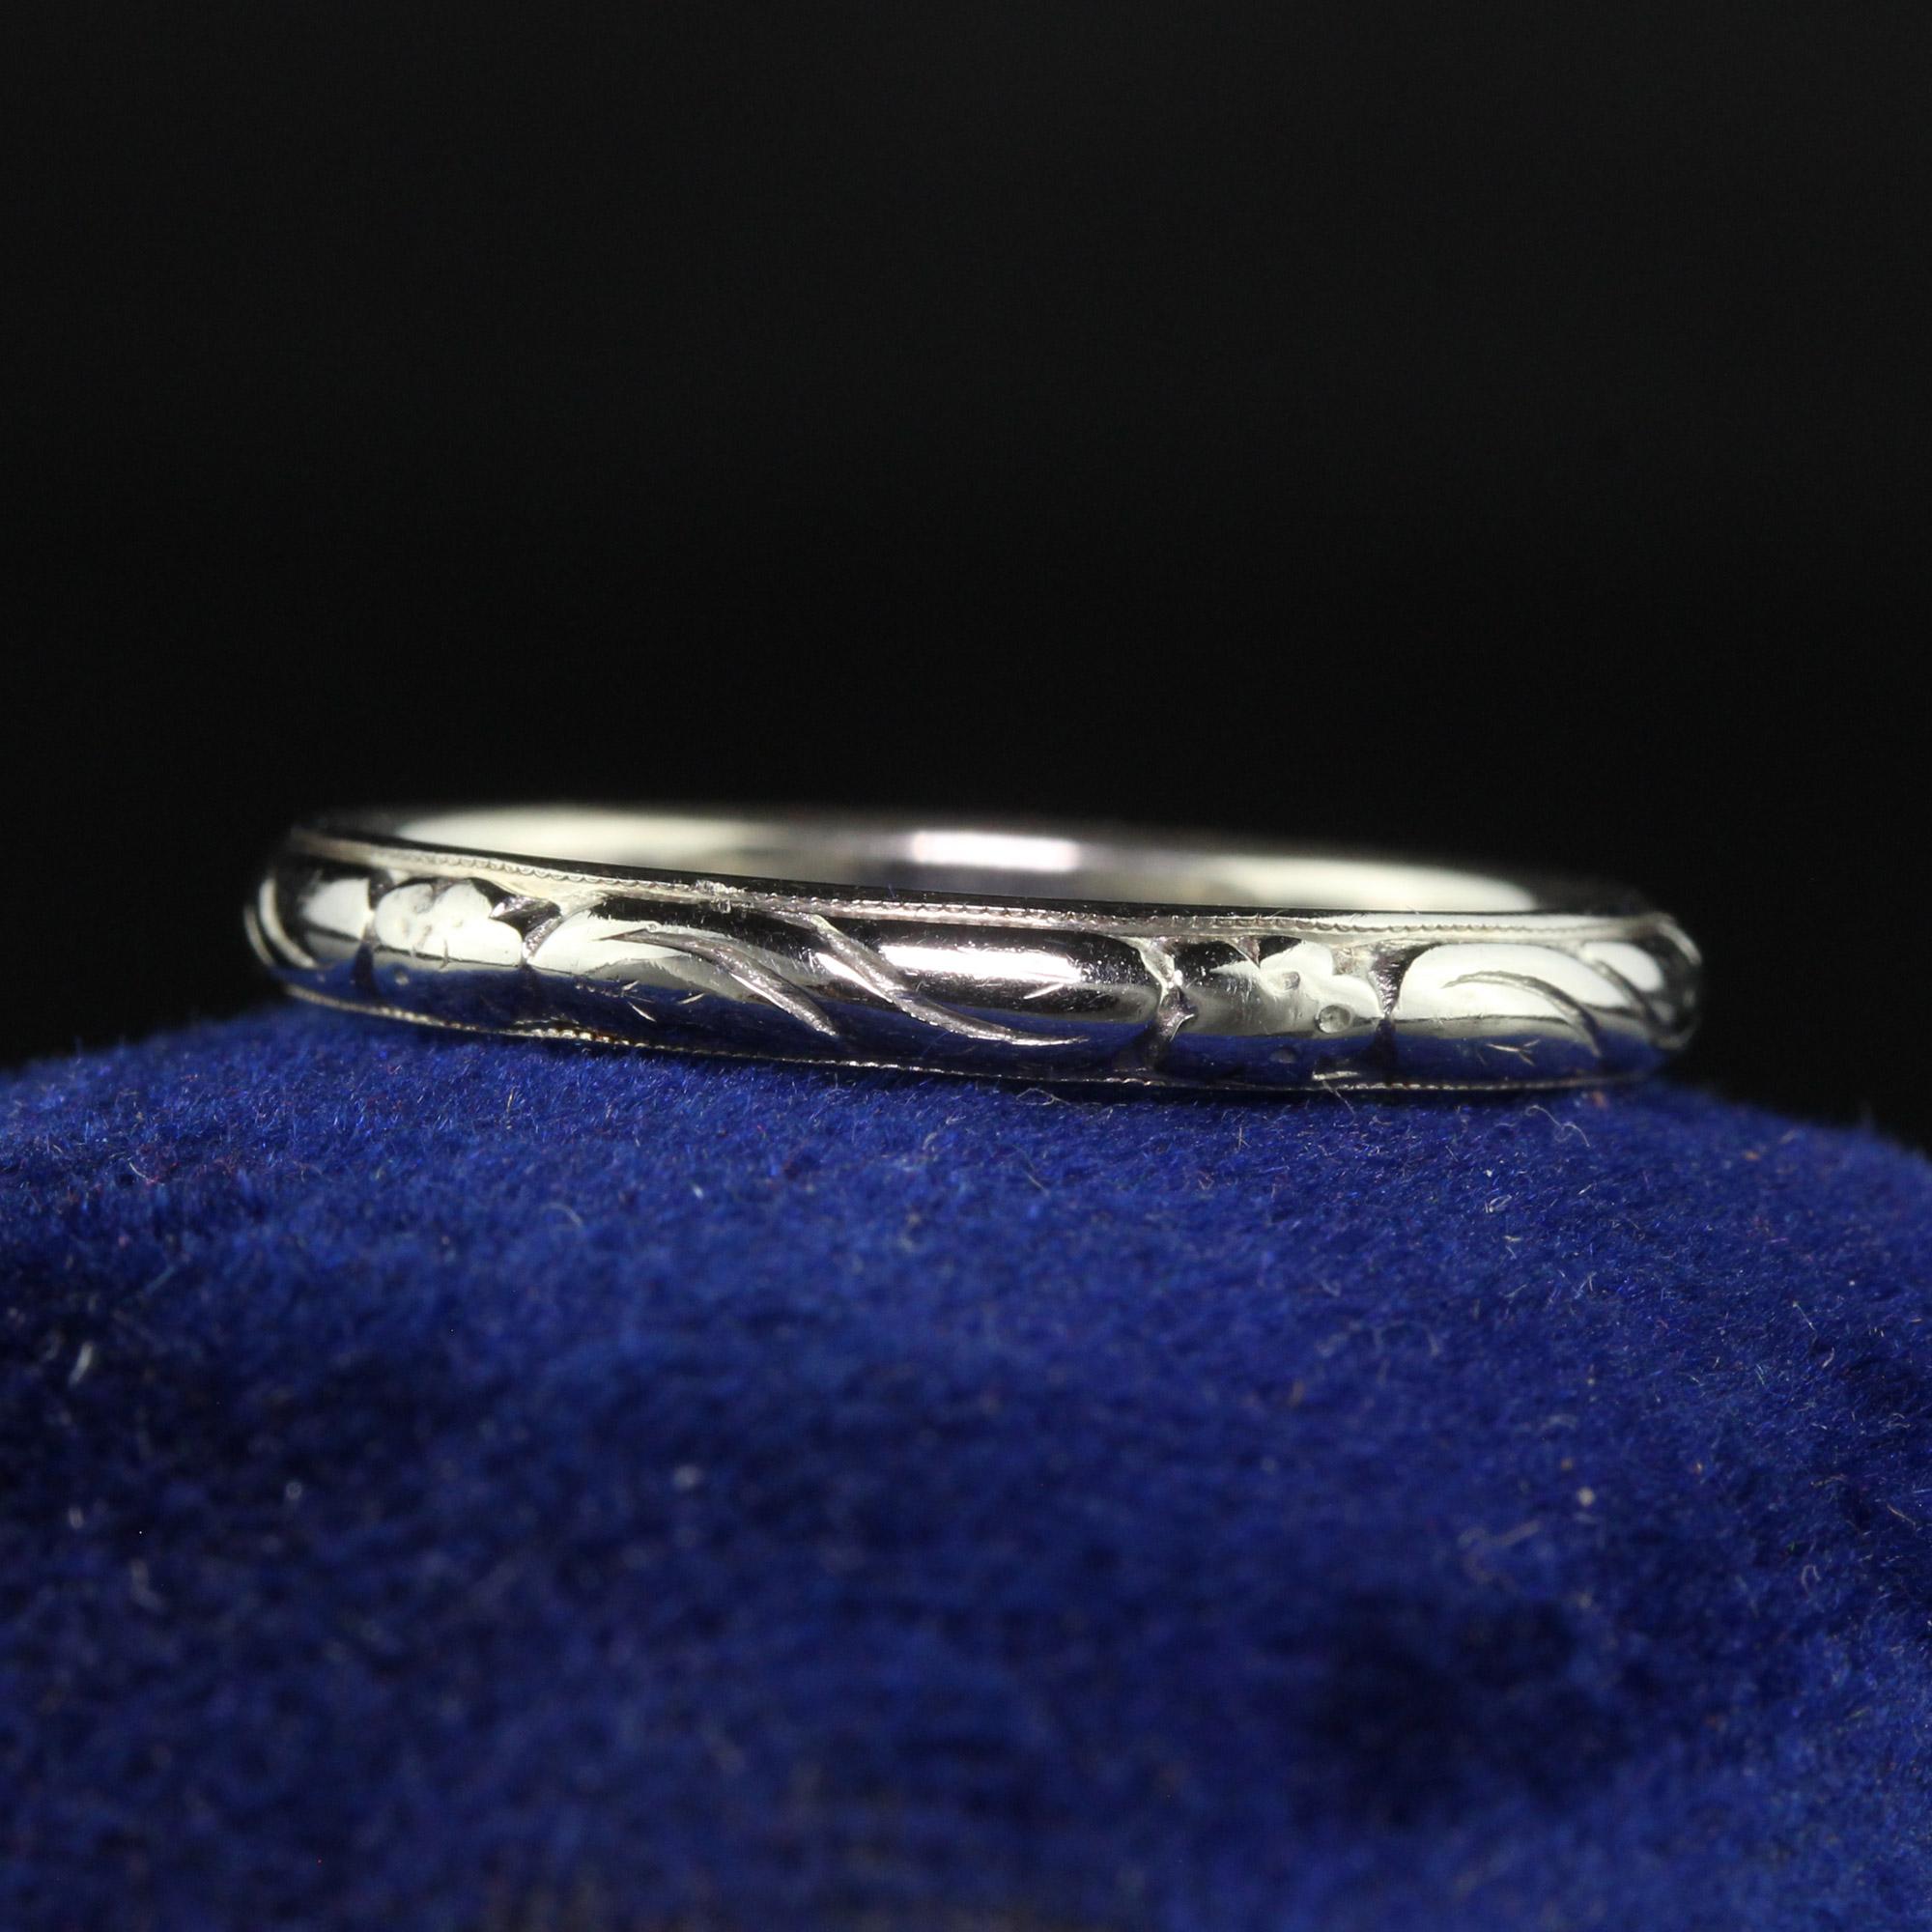 Beautiful Vintage Retro 18K White Gold Engraved Wedding Band - Size 7. This beautiful wedding band is crafted in 18k white gold. The outside of the band is beautifully engraved around the entire ring and is in great condition. The ring sits low on